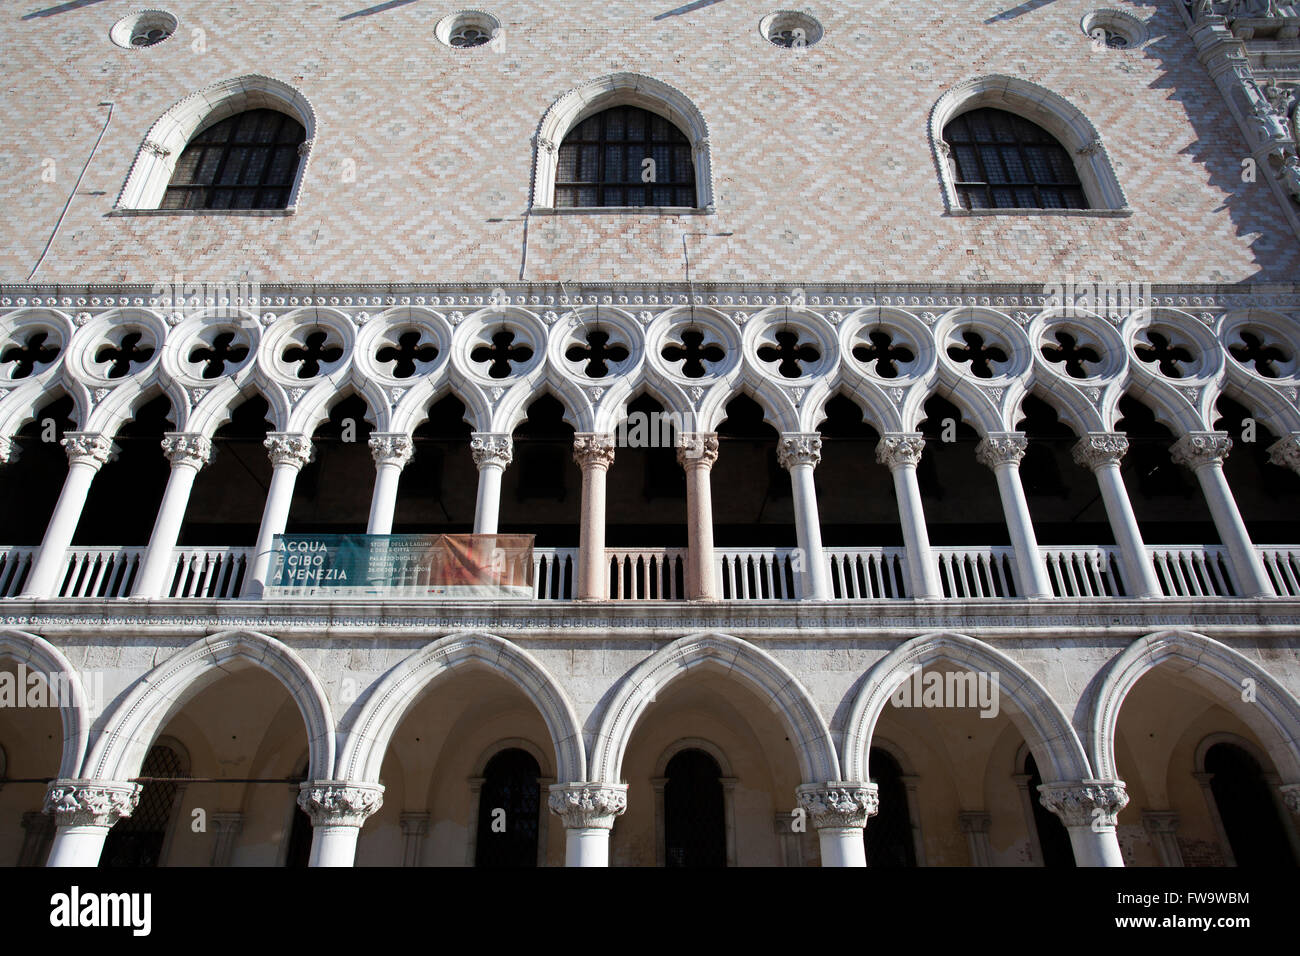 The exterior facade of the Doge`s Palace (Palazzo Ducale) in Venetian Gothic architecture, Piazzetta San Marco, Venice, Veneto, Italy. Stock Photo